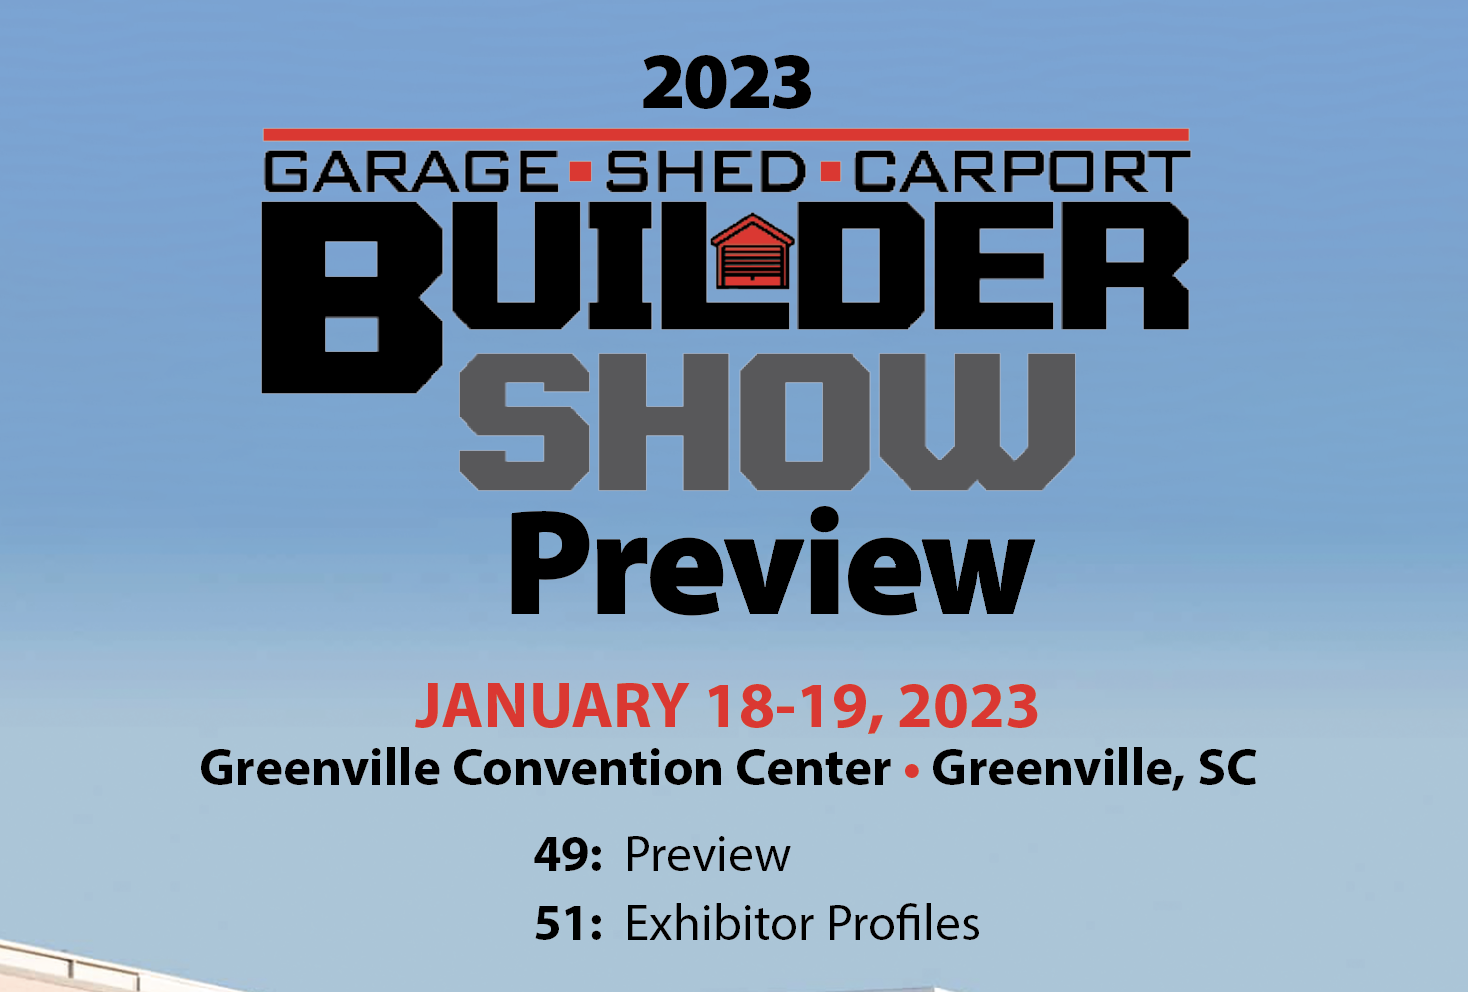 Garage, Shed, and Carport Builder Show Preview